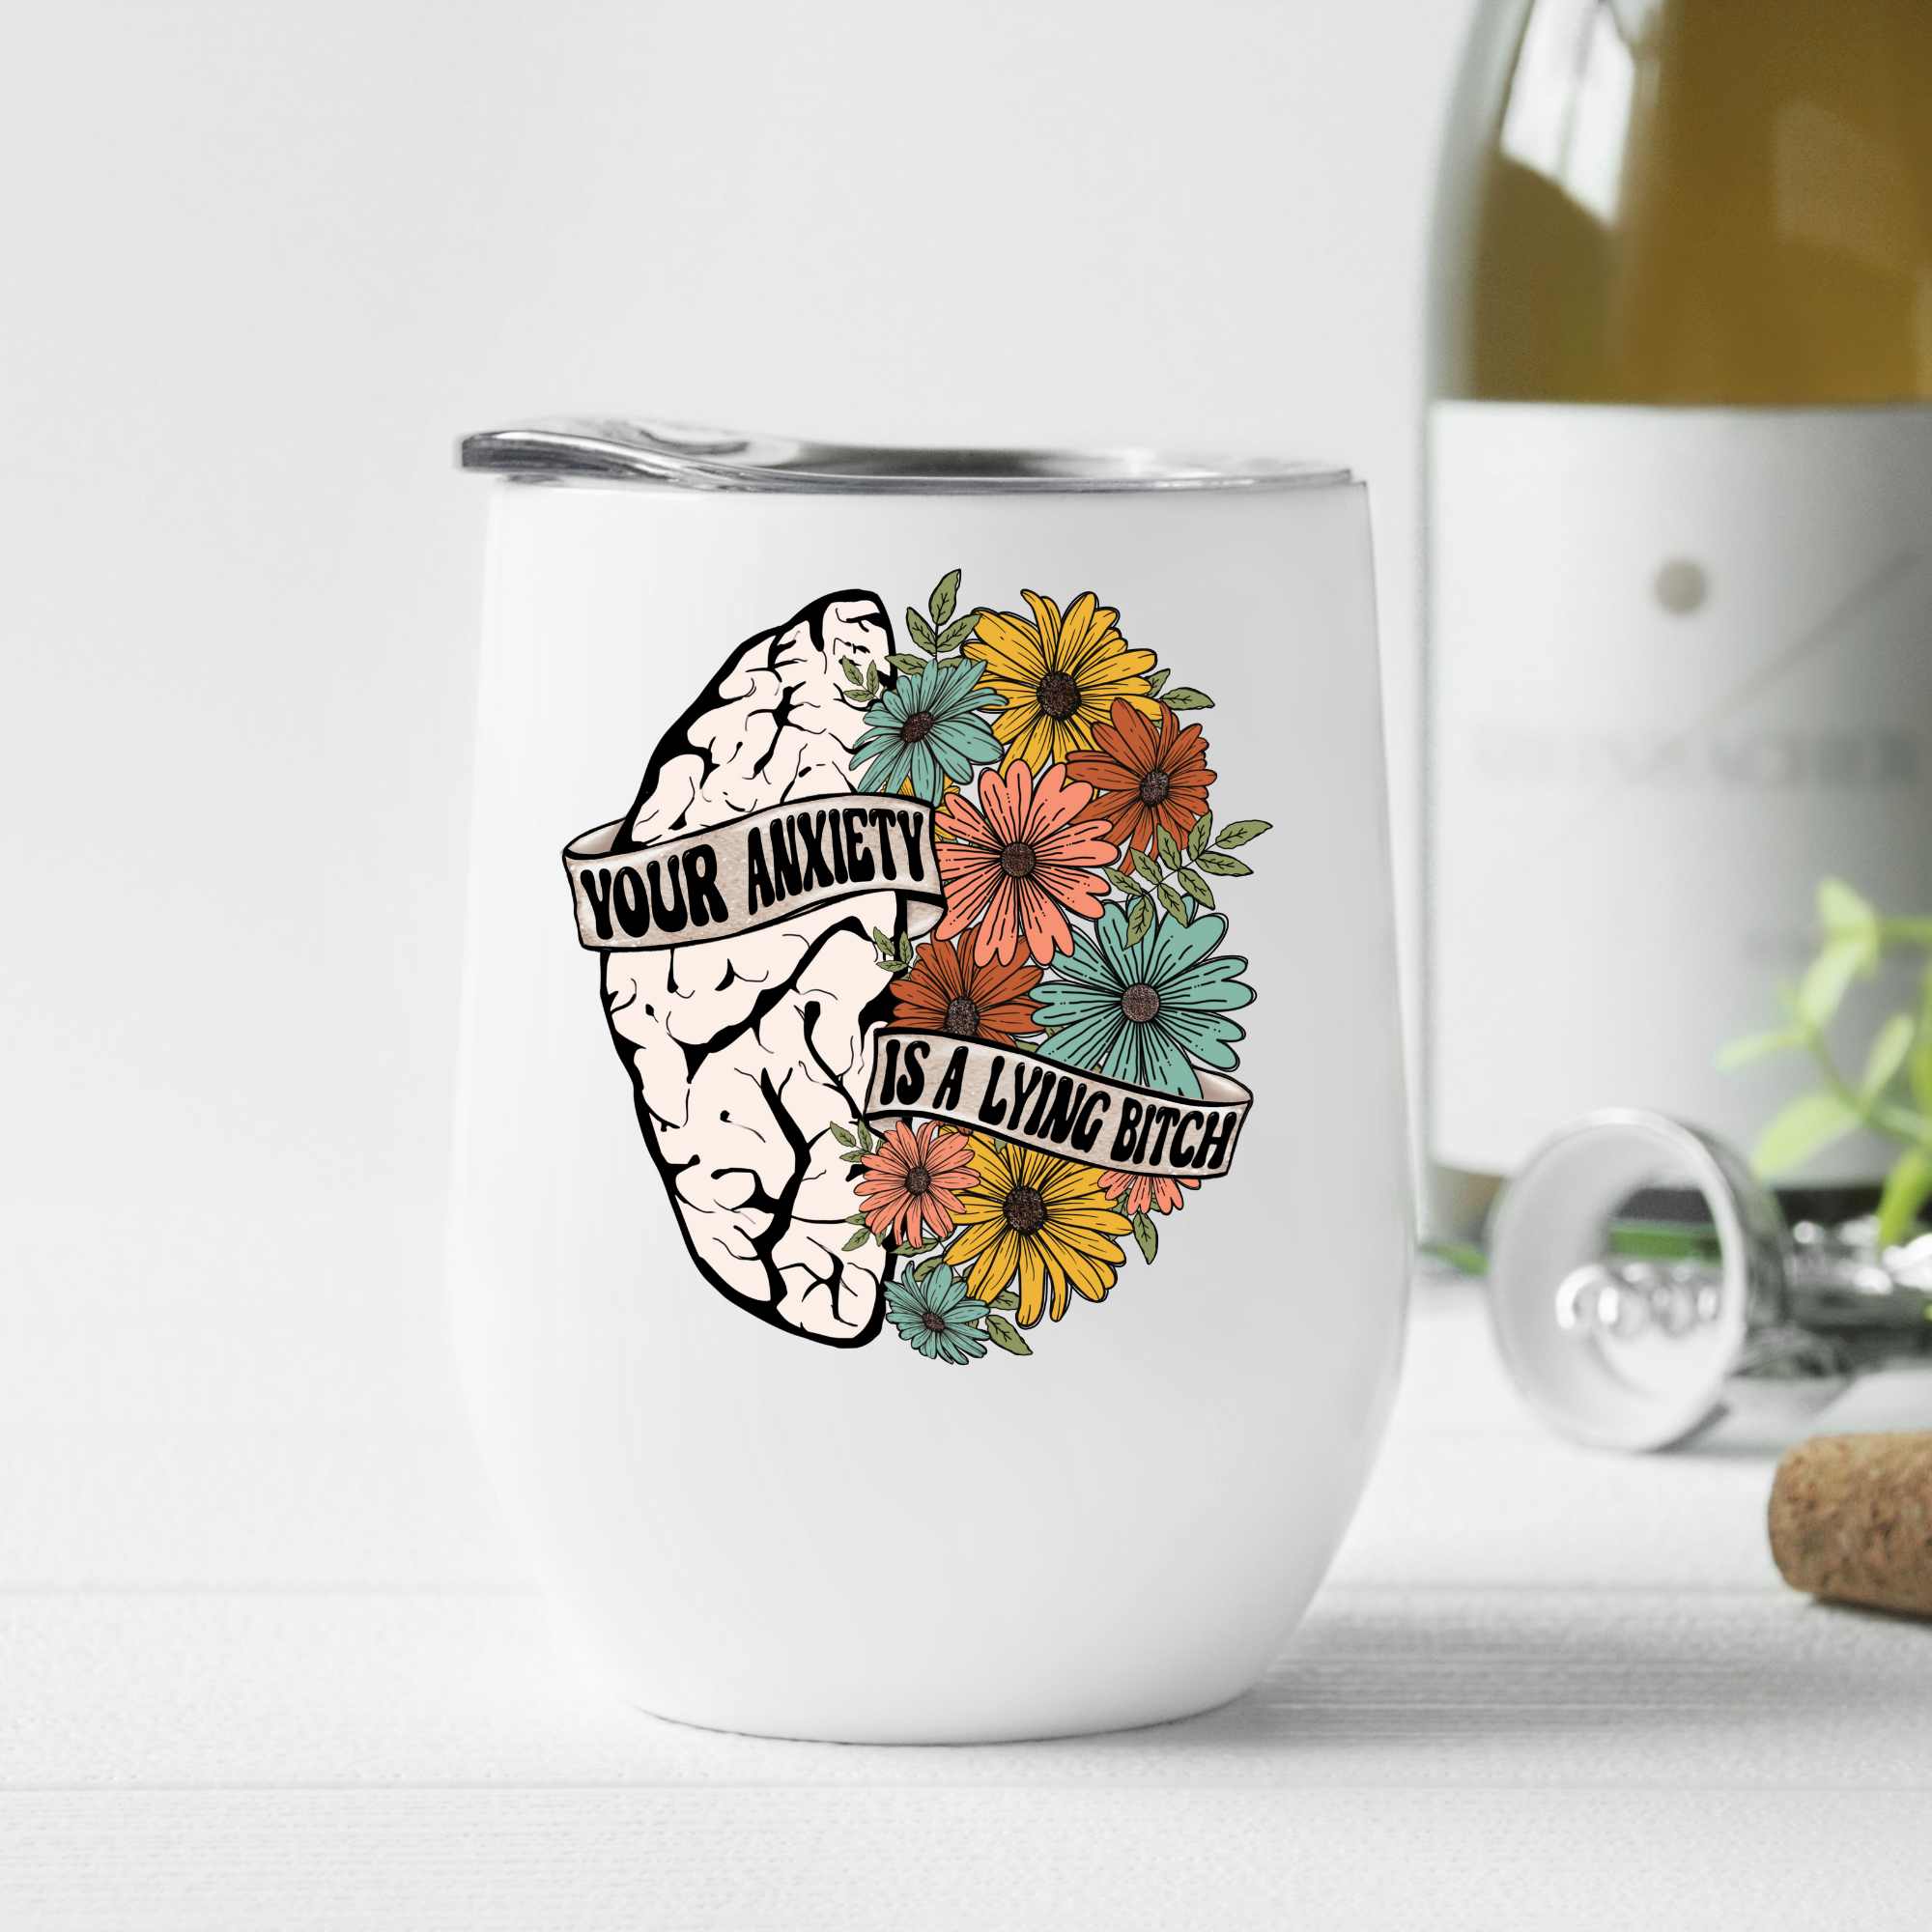 Your anxiety is a lying bitch- Wine Tumbler (12oz)